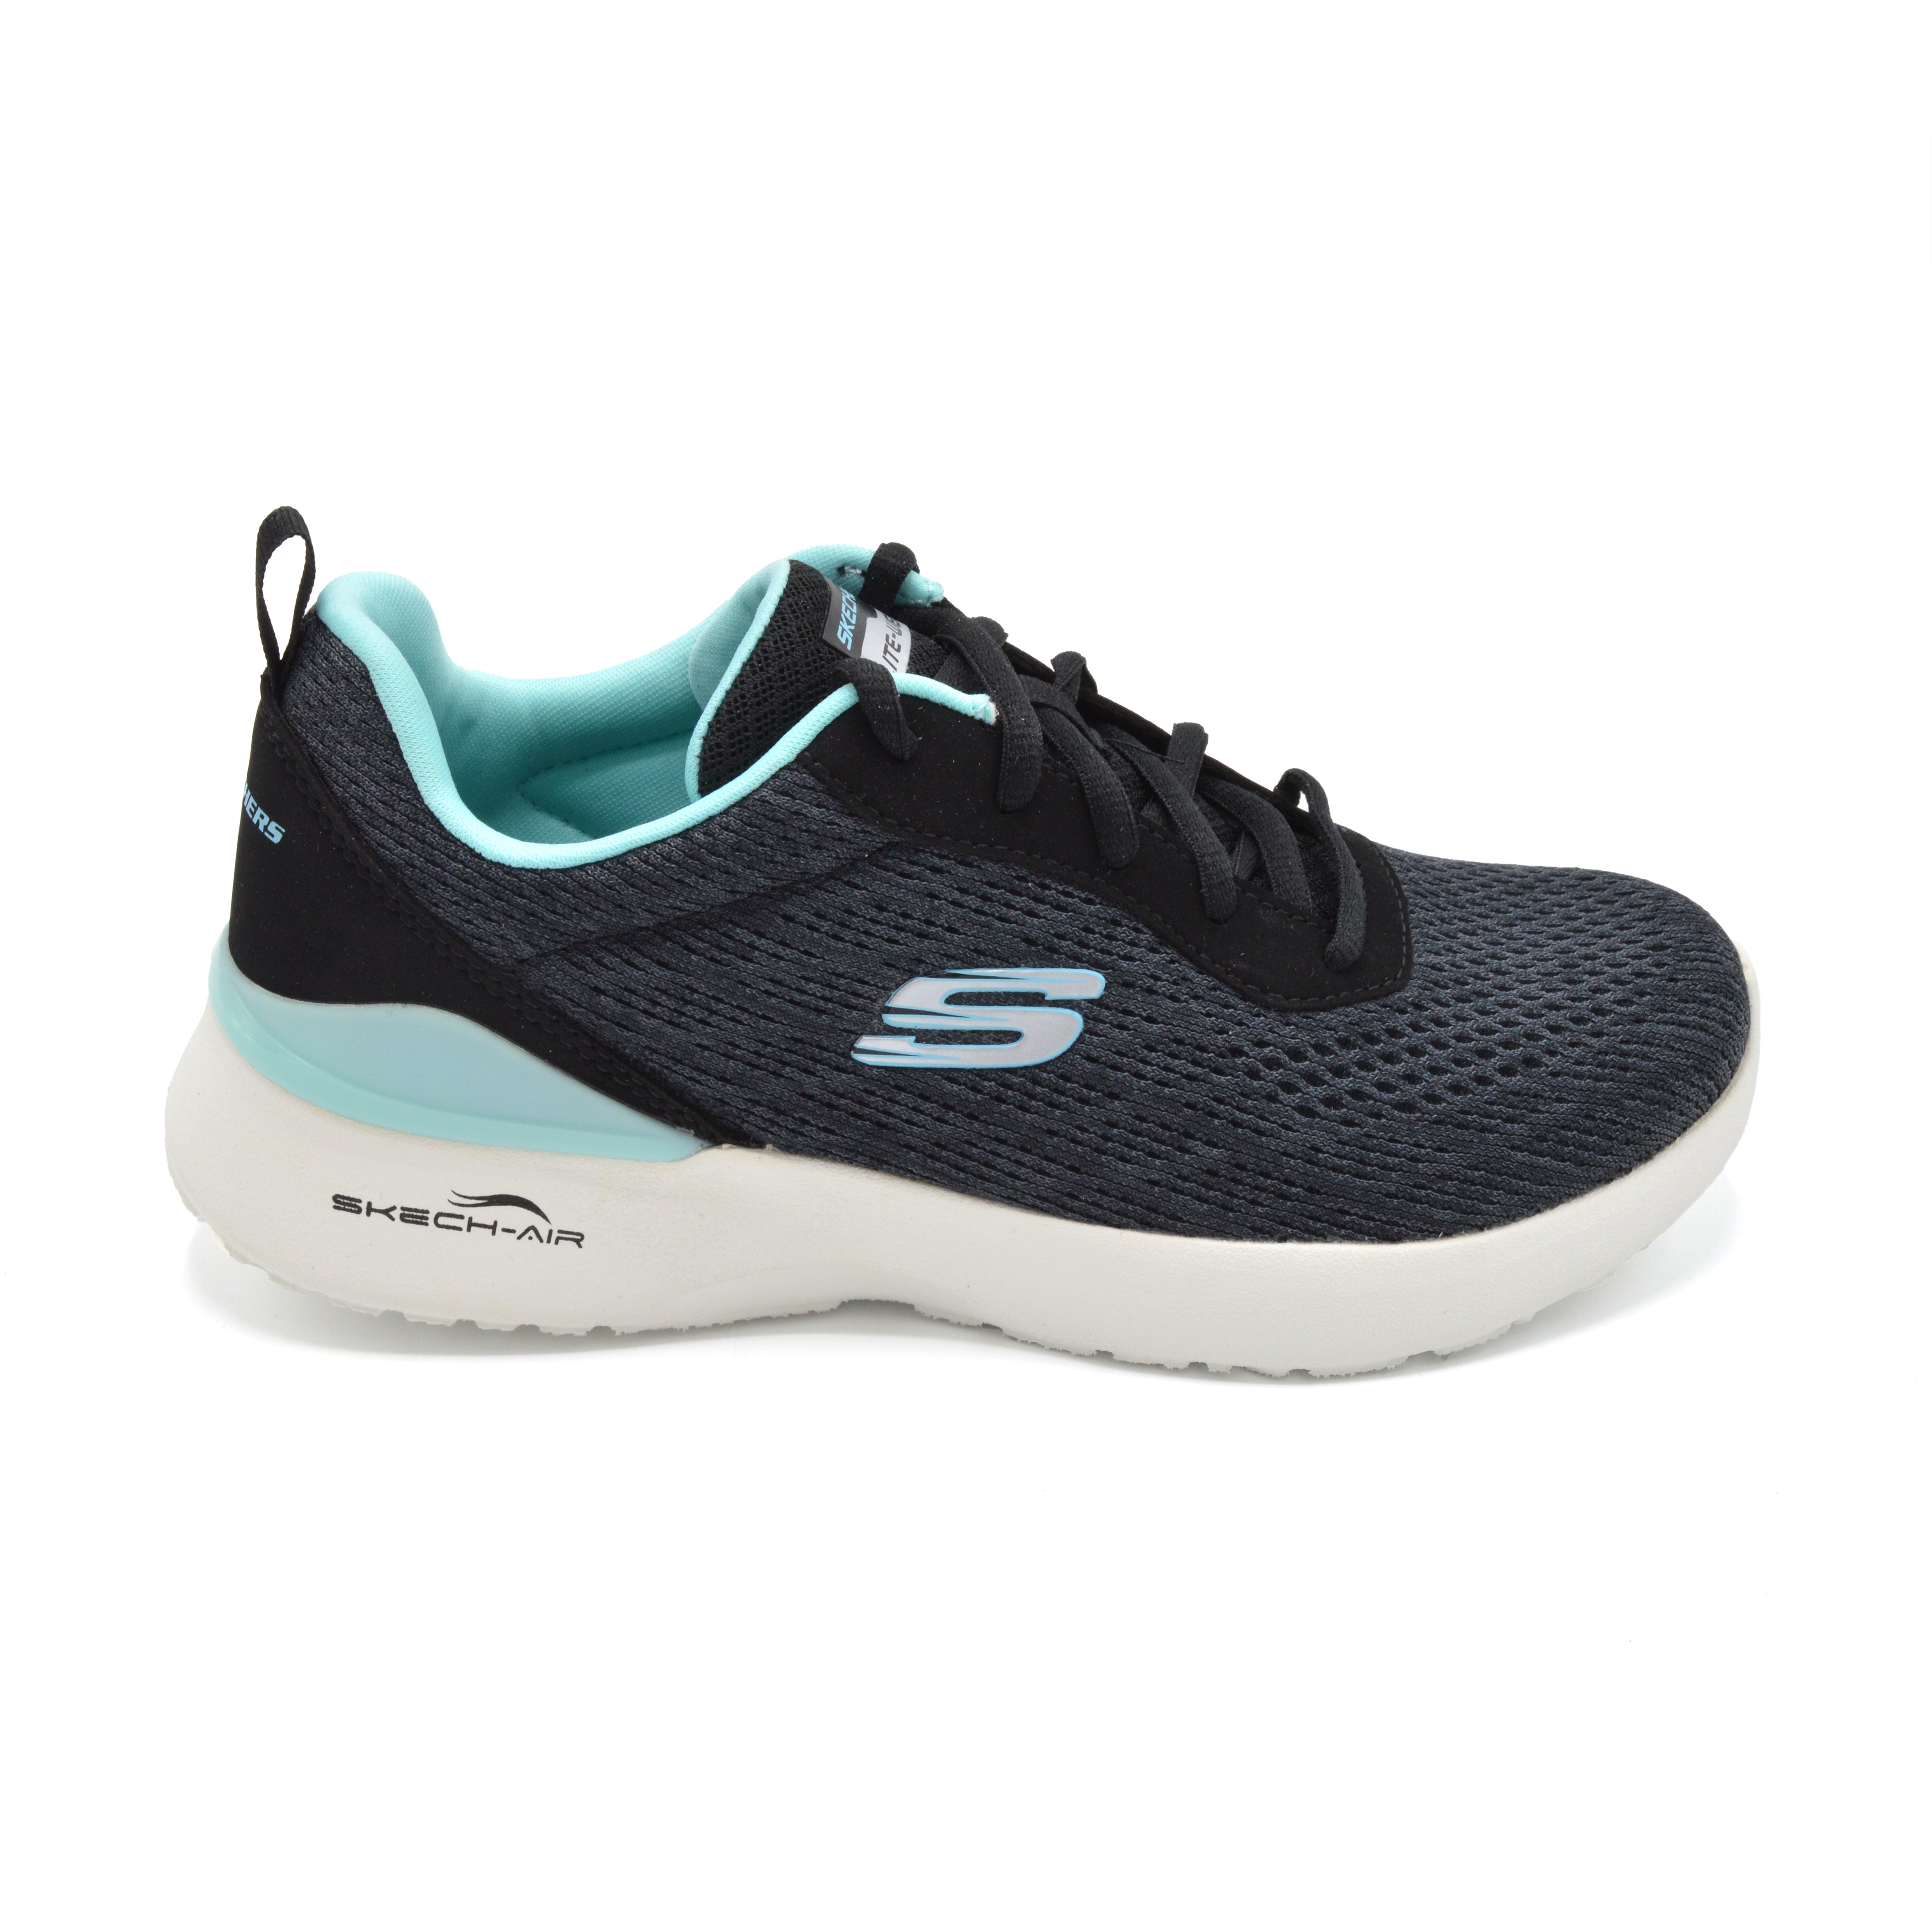 Ladies Wide Fit Skechers Trainer - Black/Torquoise - Wider 2E Fitting ...